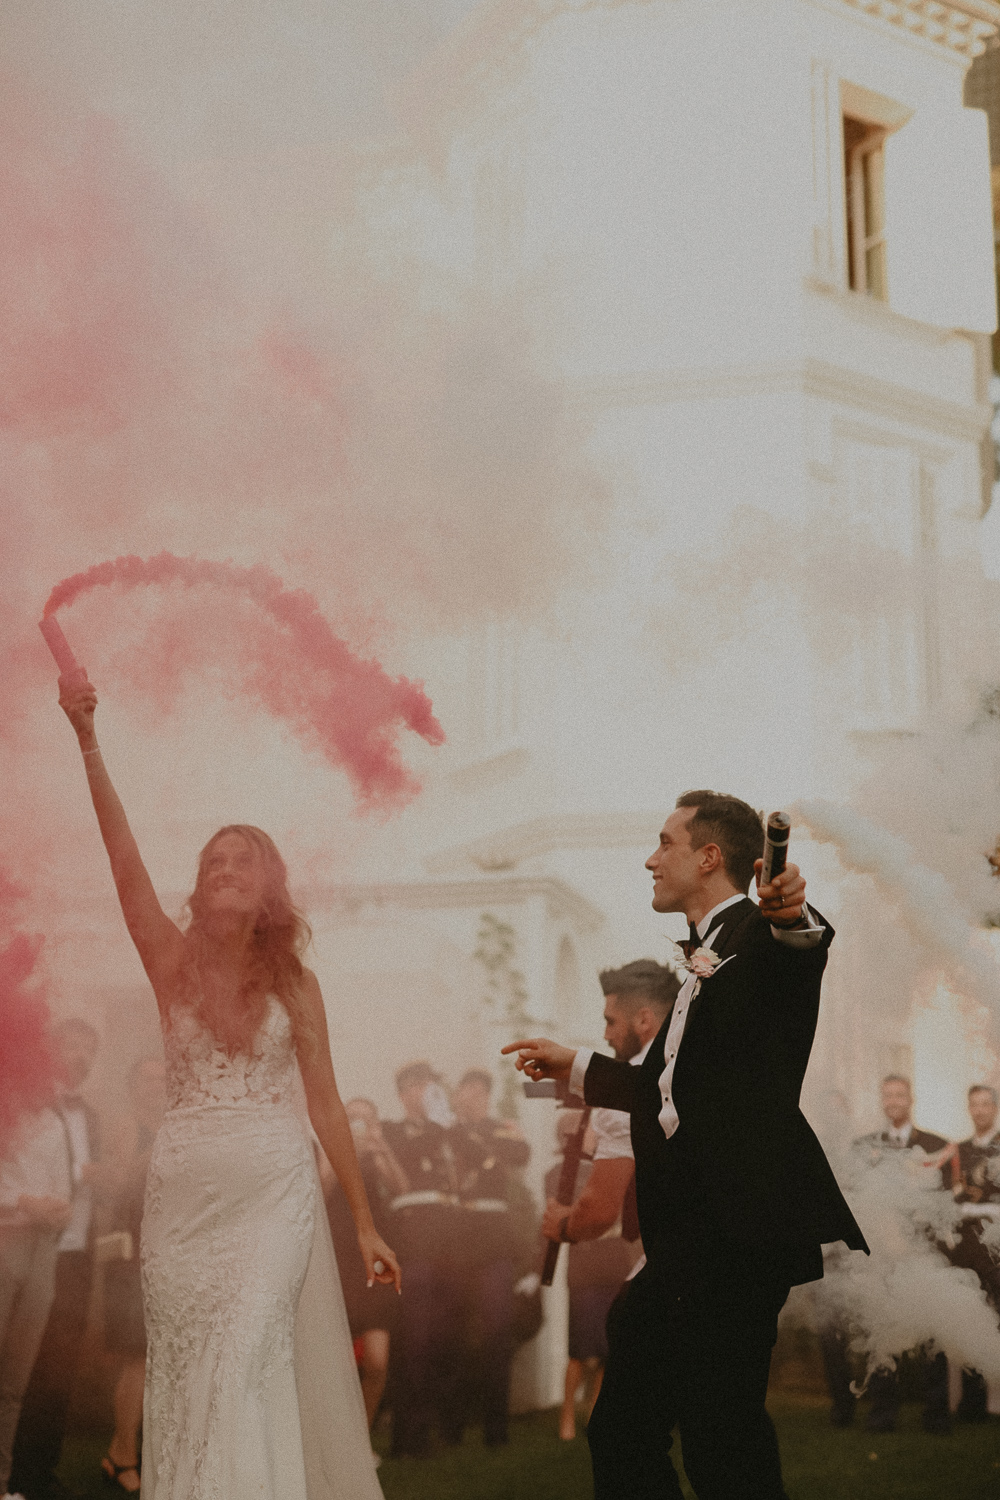 Mariage Couture à Cannes - Faustine + Nathan - Blog Mariage Madame C